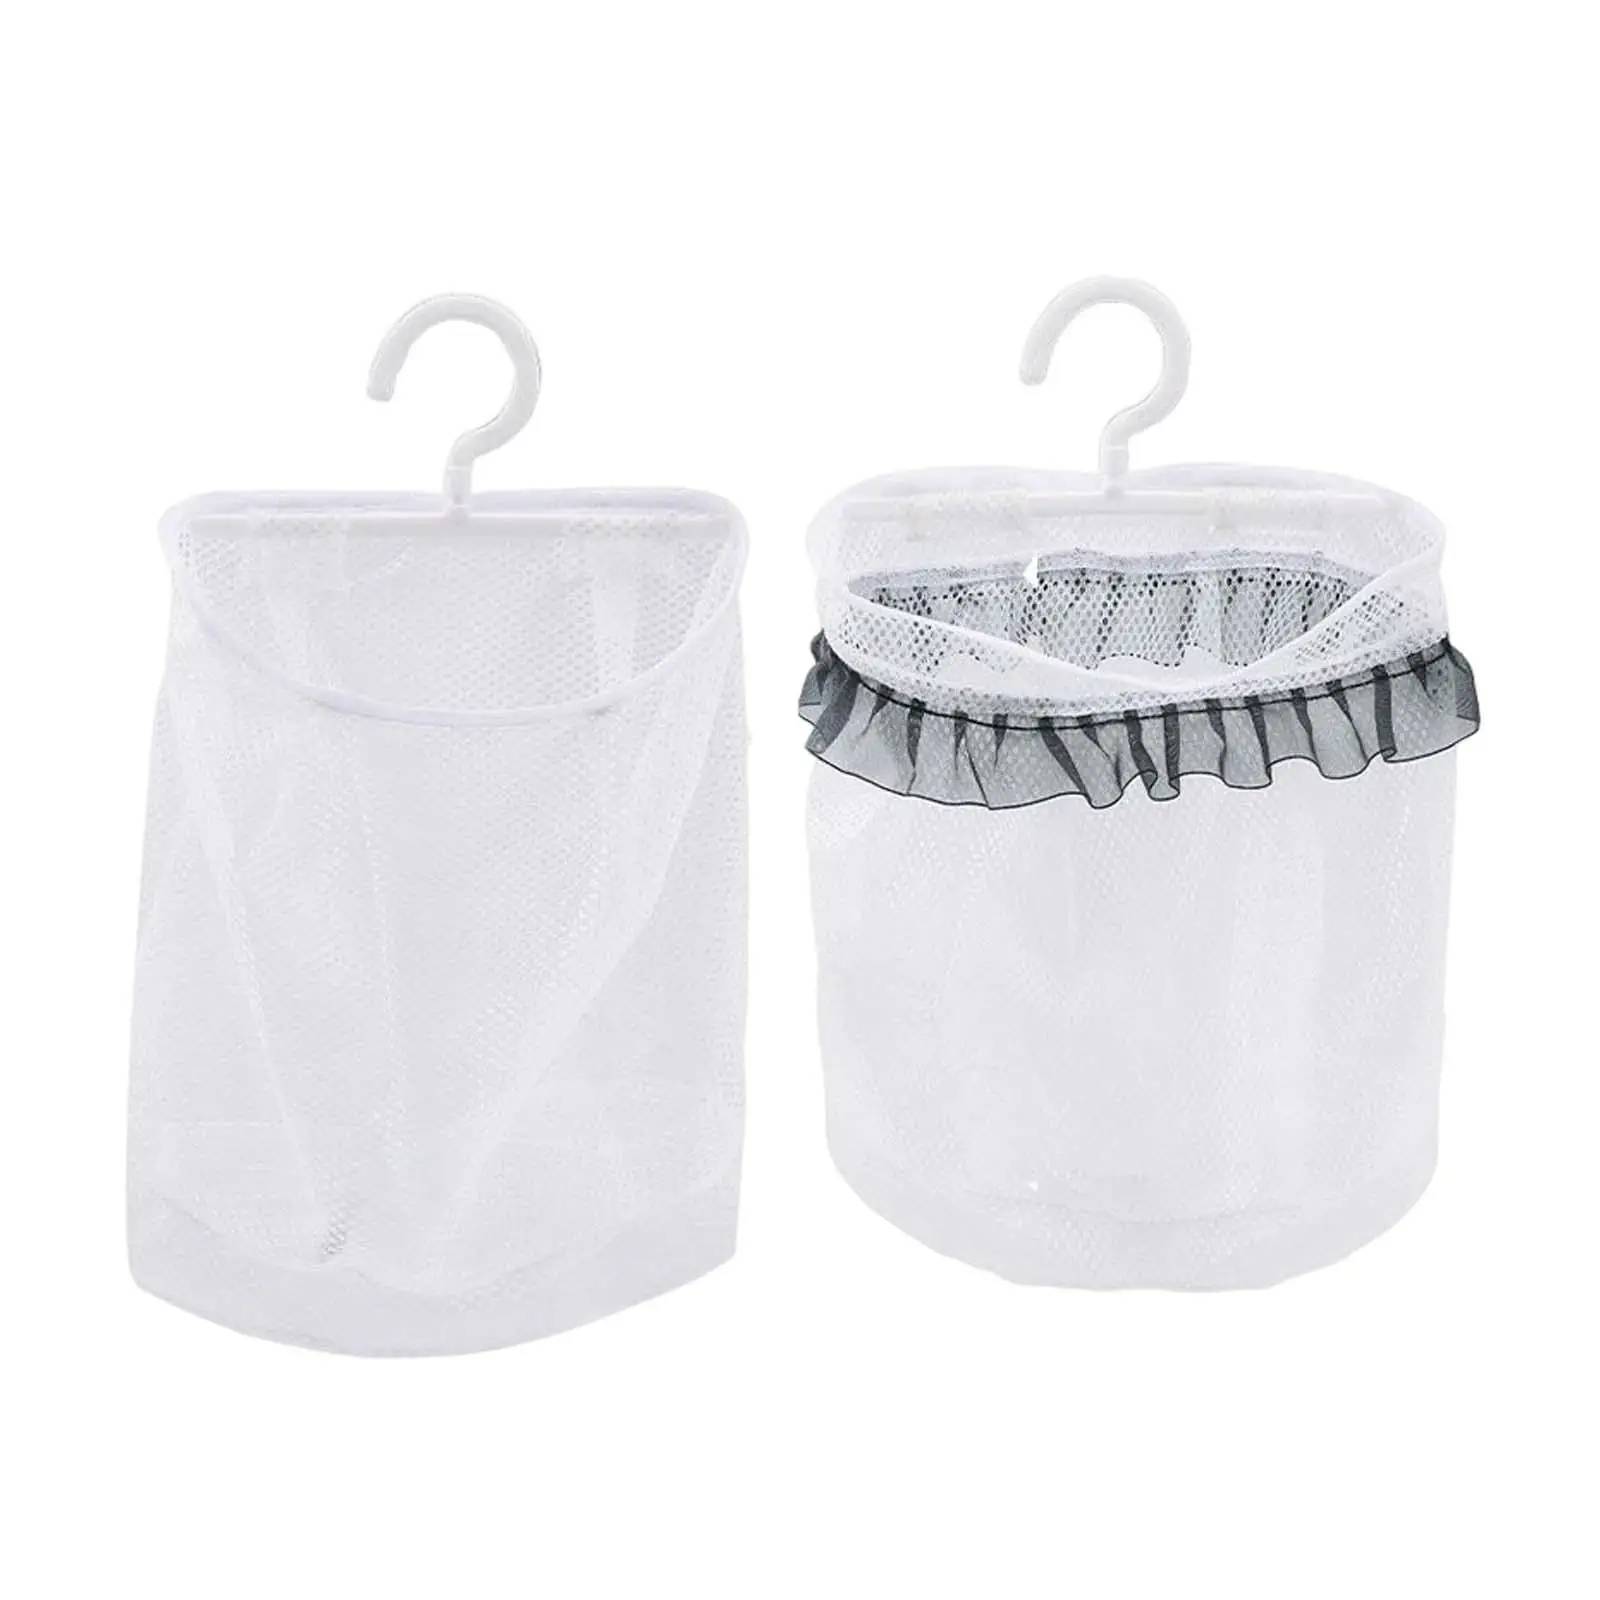 Clothespin Bag with Hanger Breathable Mesh Nets for Bathroom Travel Hotel